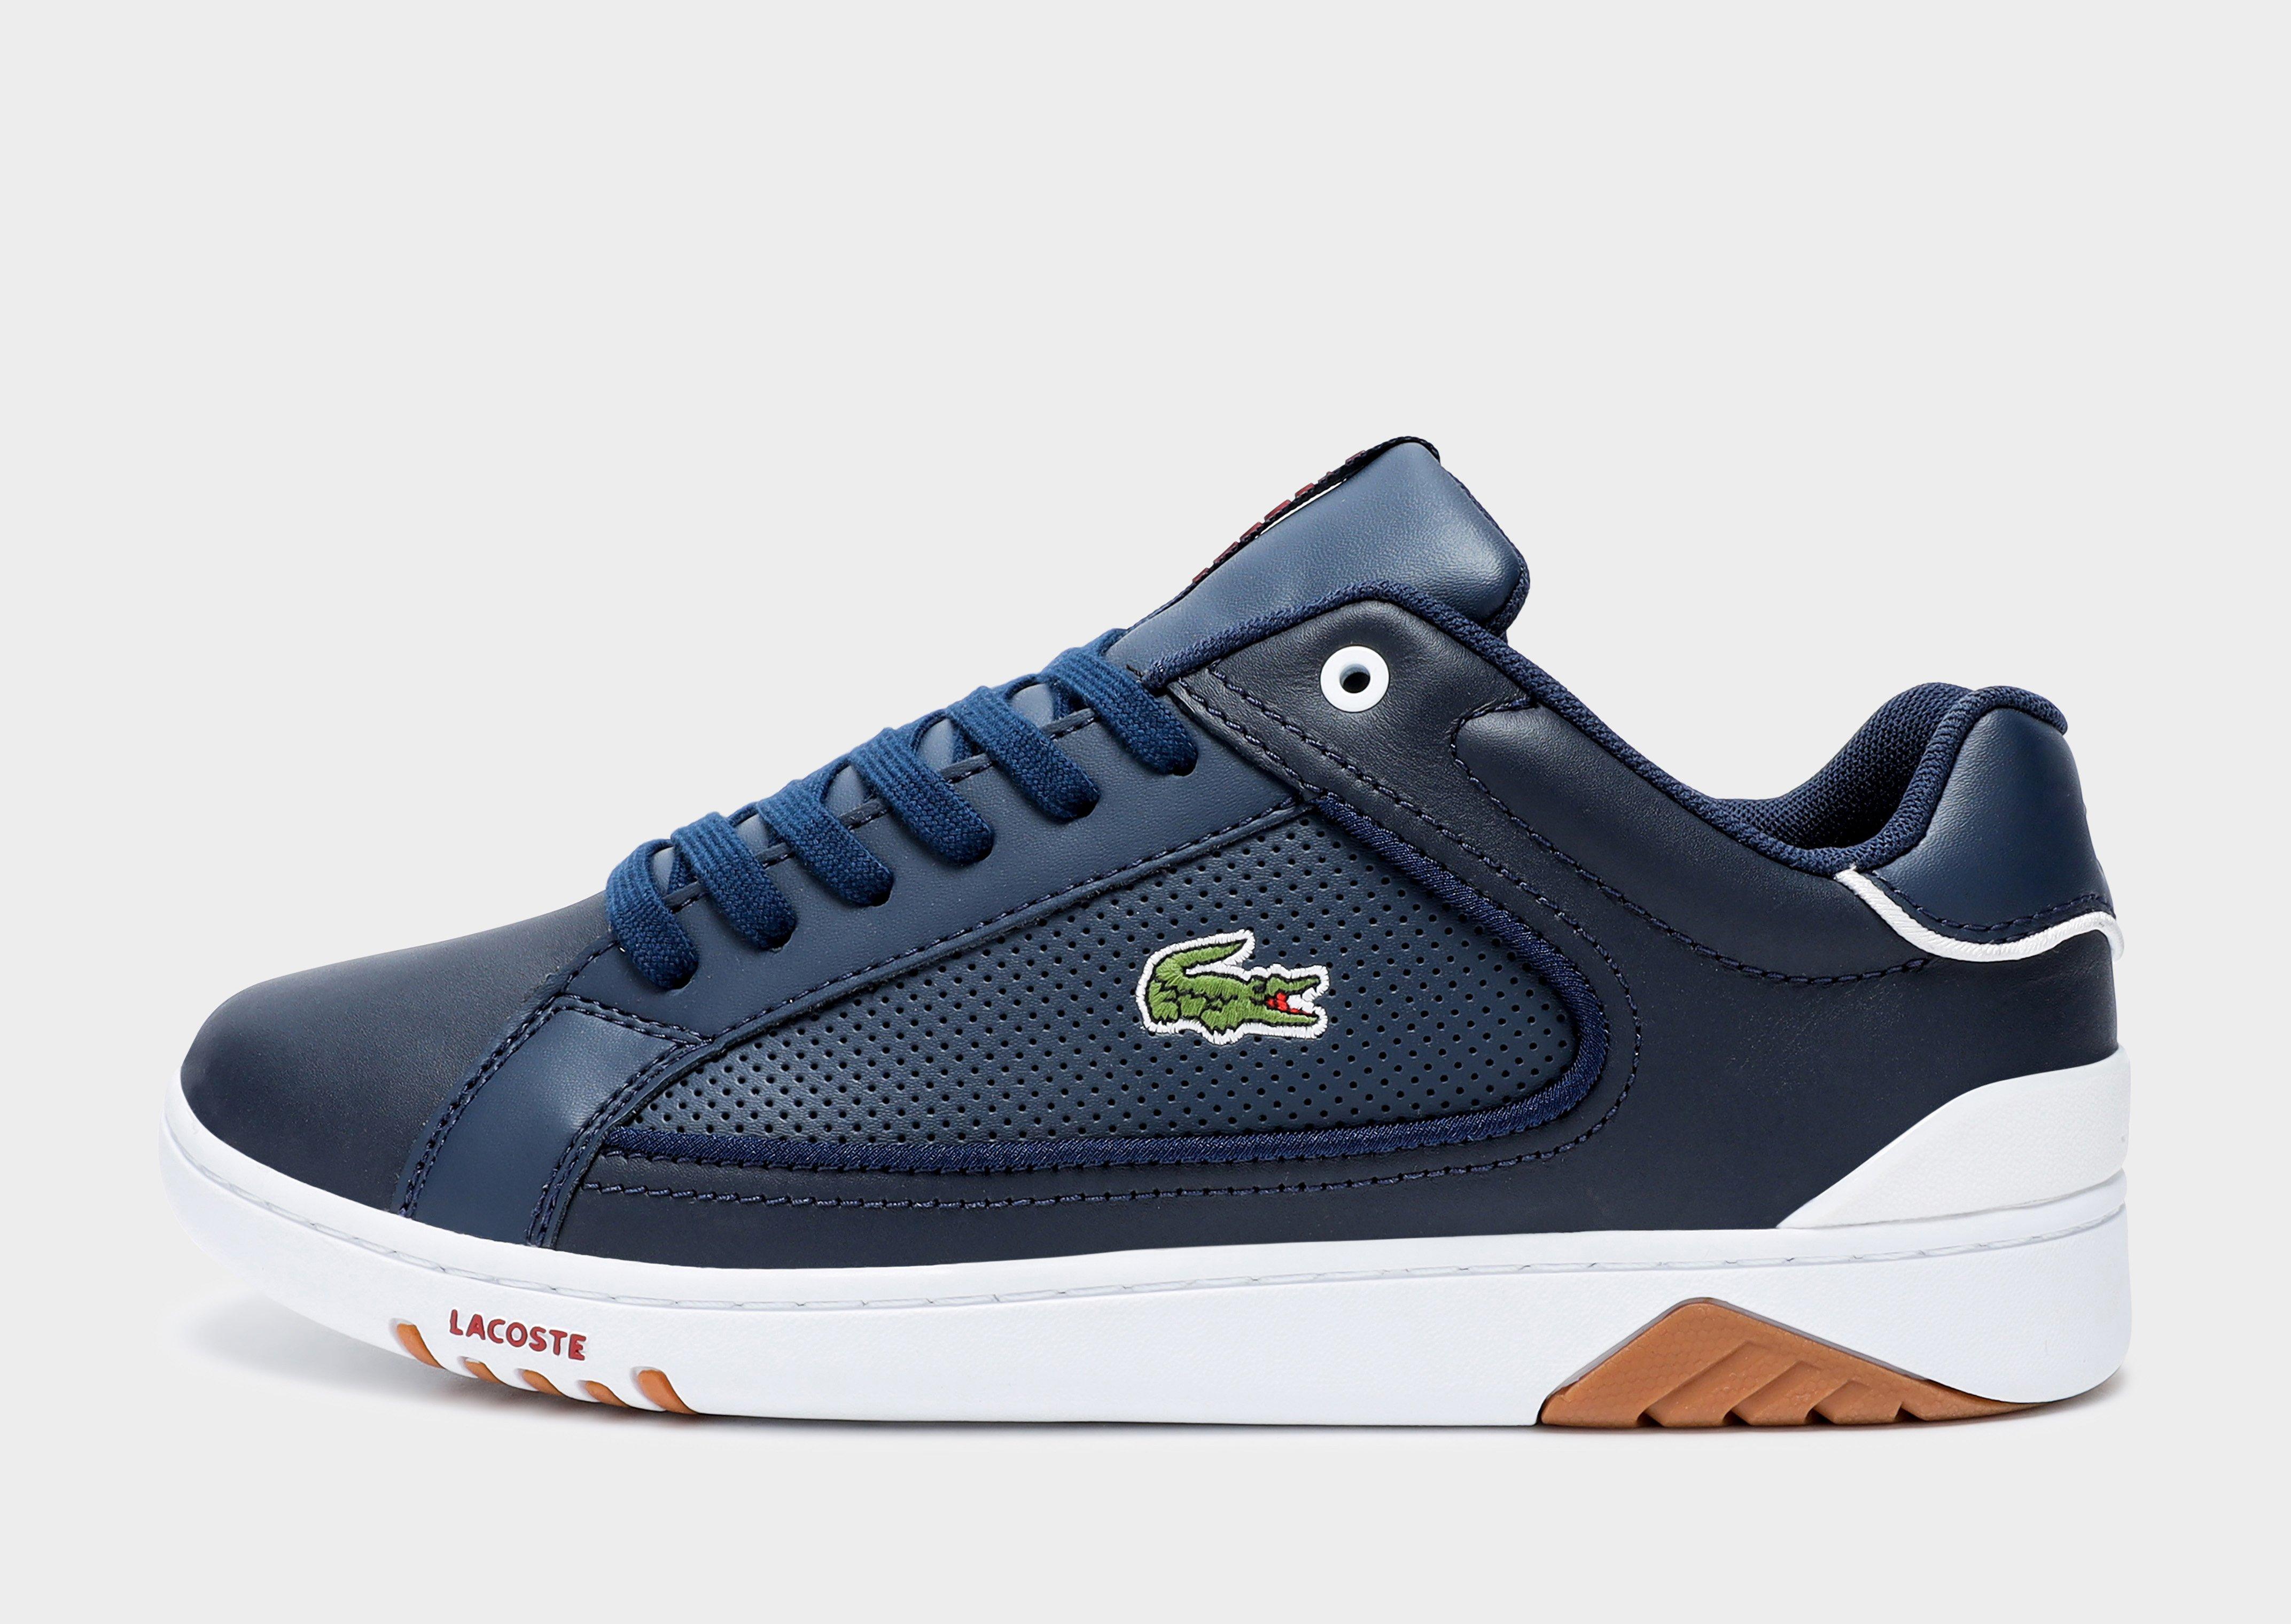 lacoste trainers jd sports